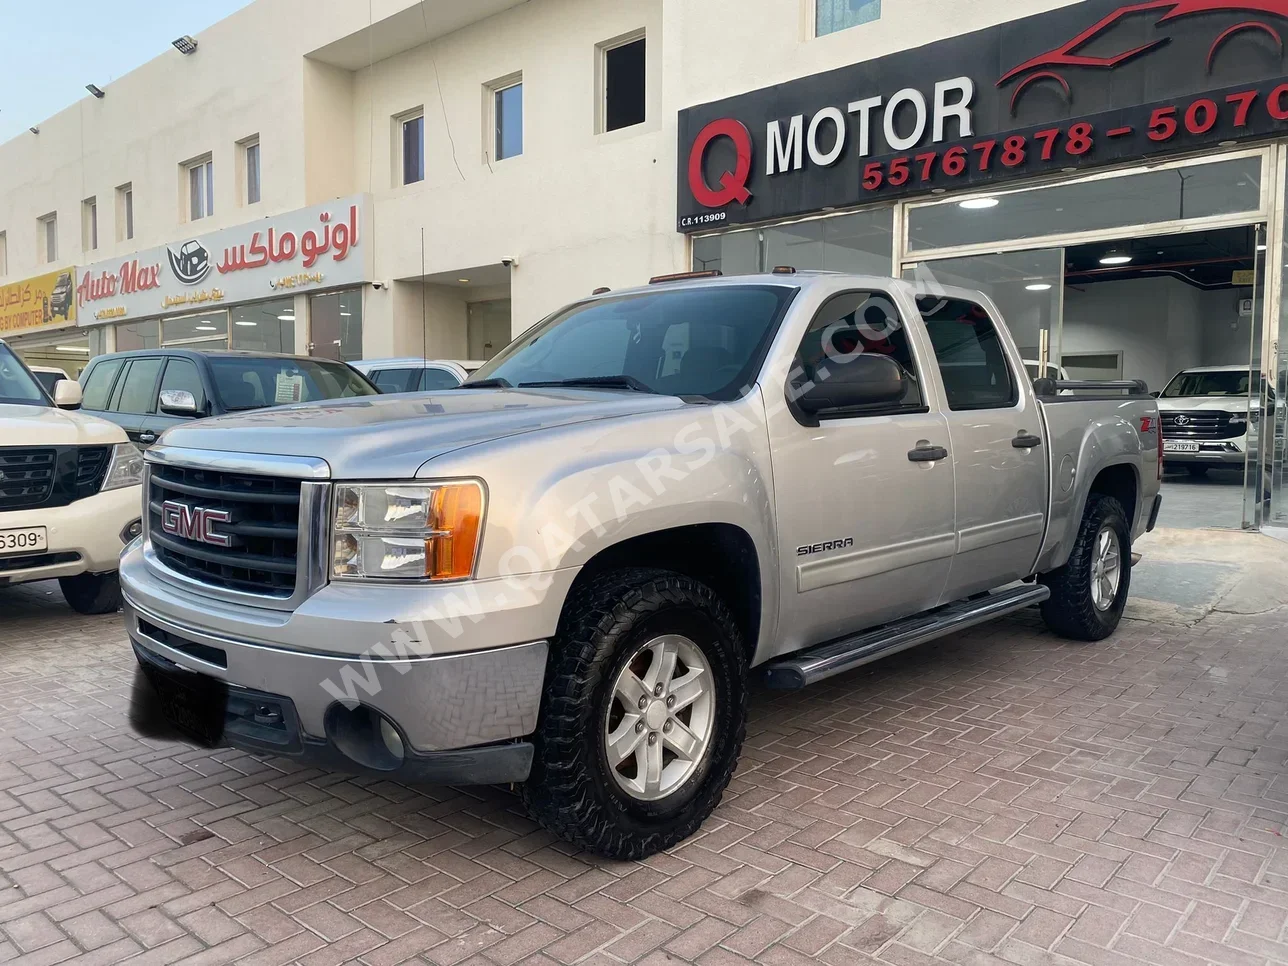 GMC  Sierra  1500  2011  Automatic  258,000 Km  8 Cylinder  Four Wheel Drive (4WD)  Pick Up  Silver